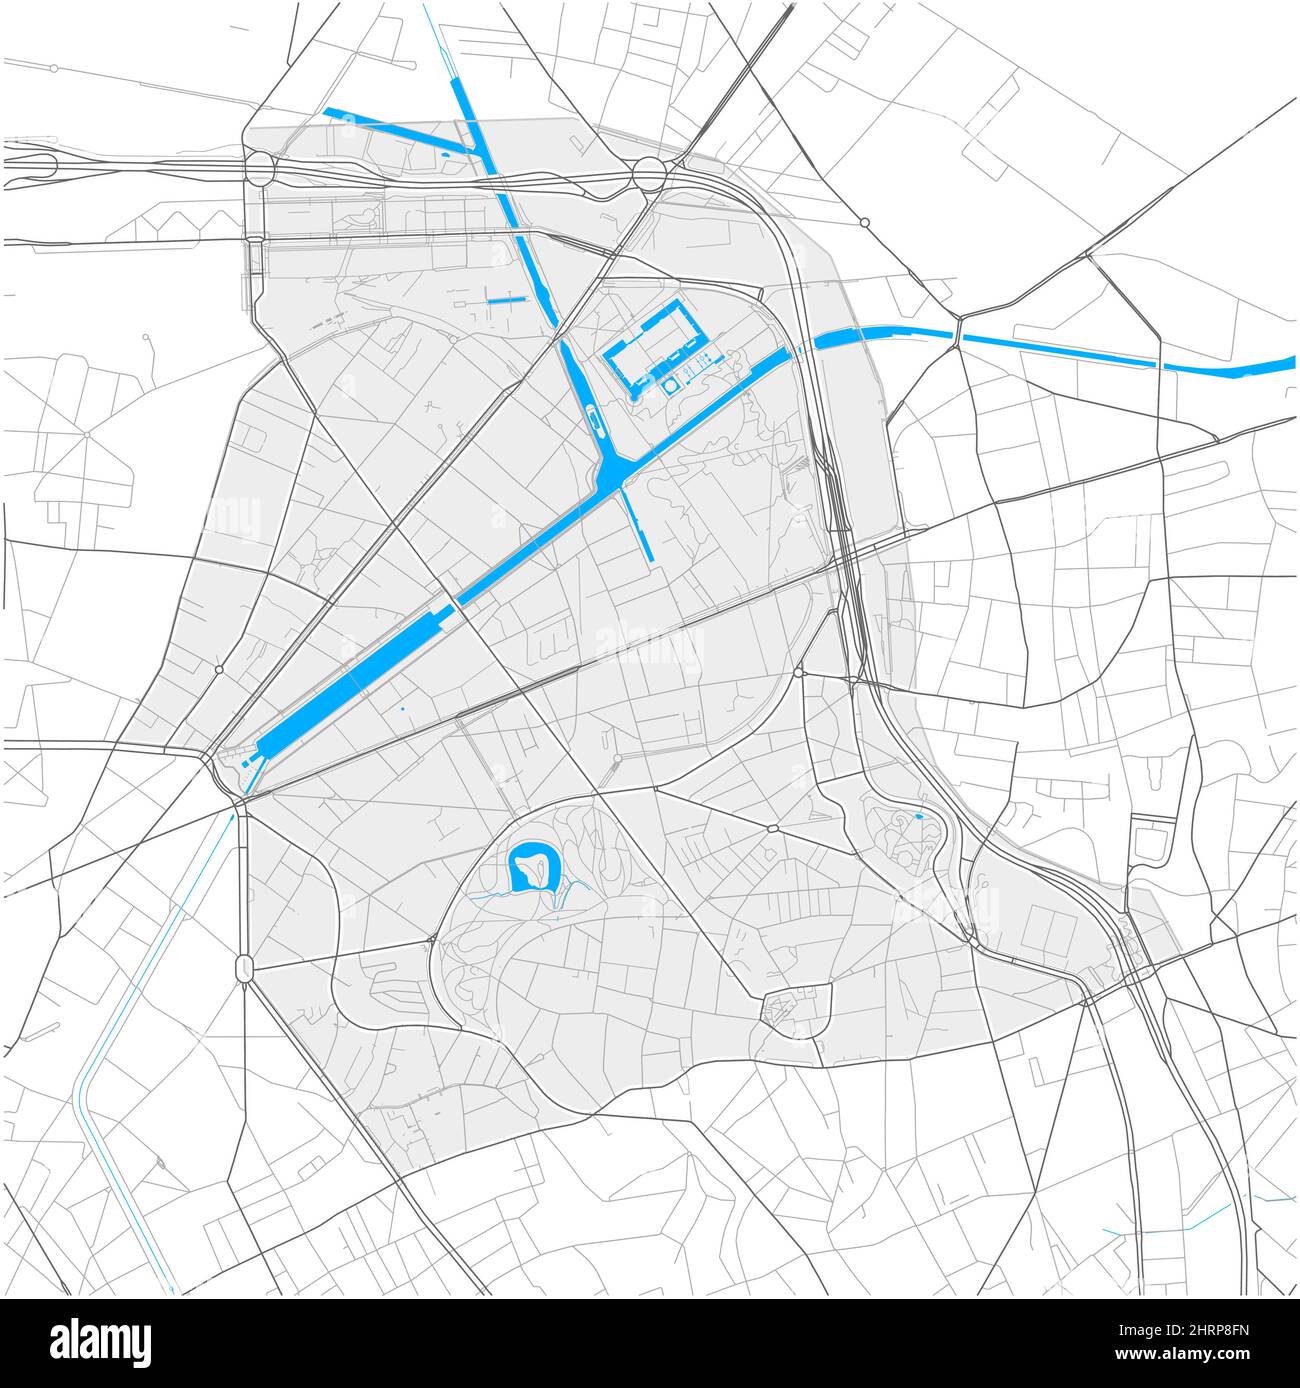 19th Arrondissement, Paris, FRANCE, high detail vector map with city boundaries and editable paths. White outlines for main roads. Many smaller paths. Stock Vector